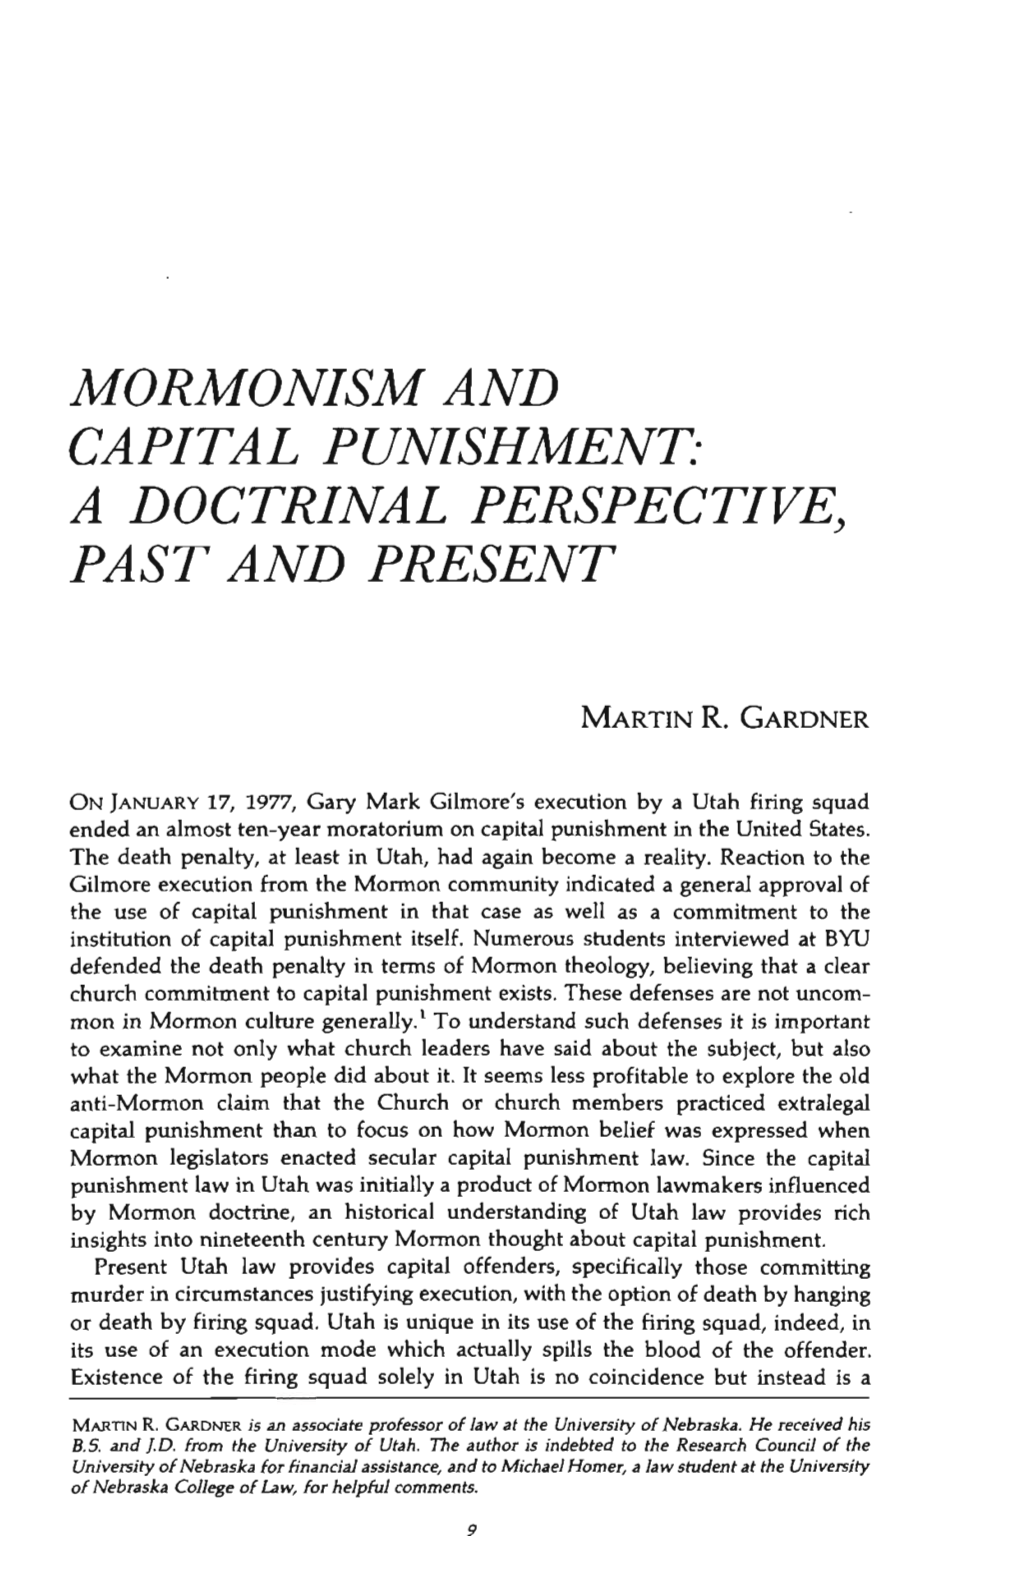 Mormonism and Capital Punishment: a Doctrinal Perspective, Past and Present